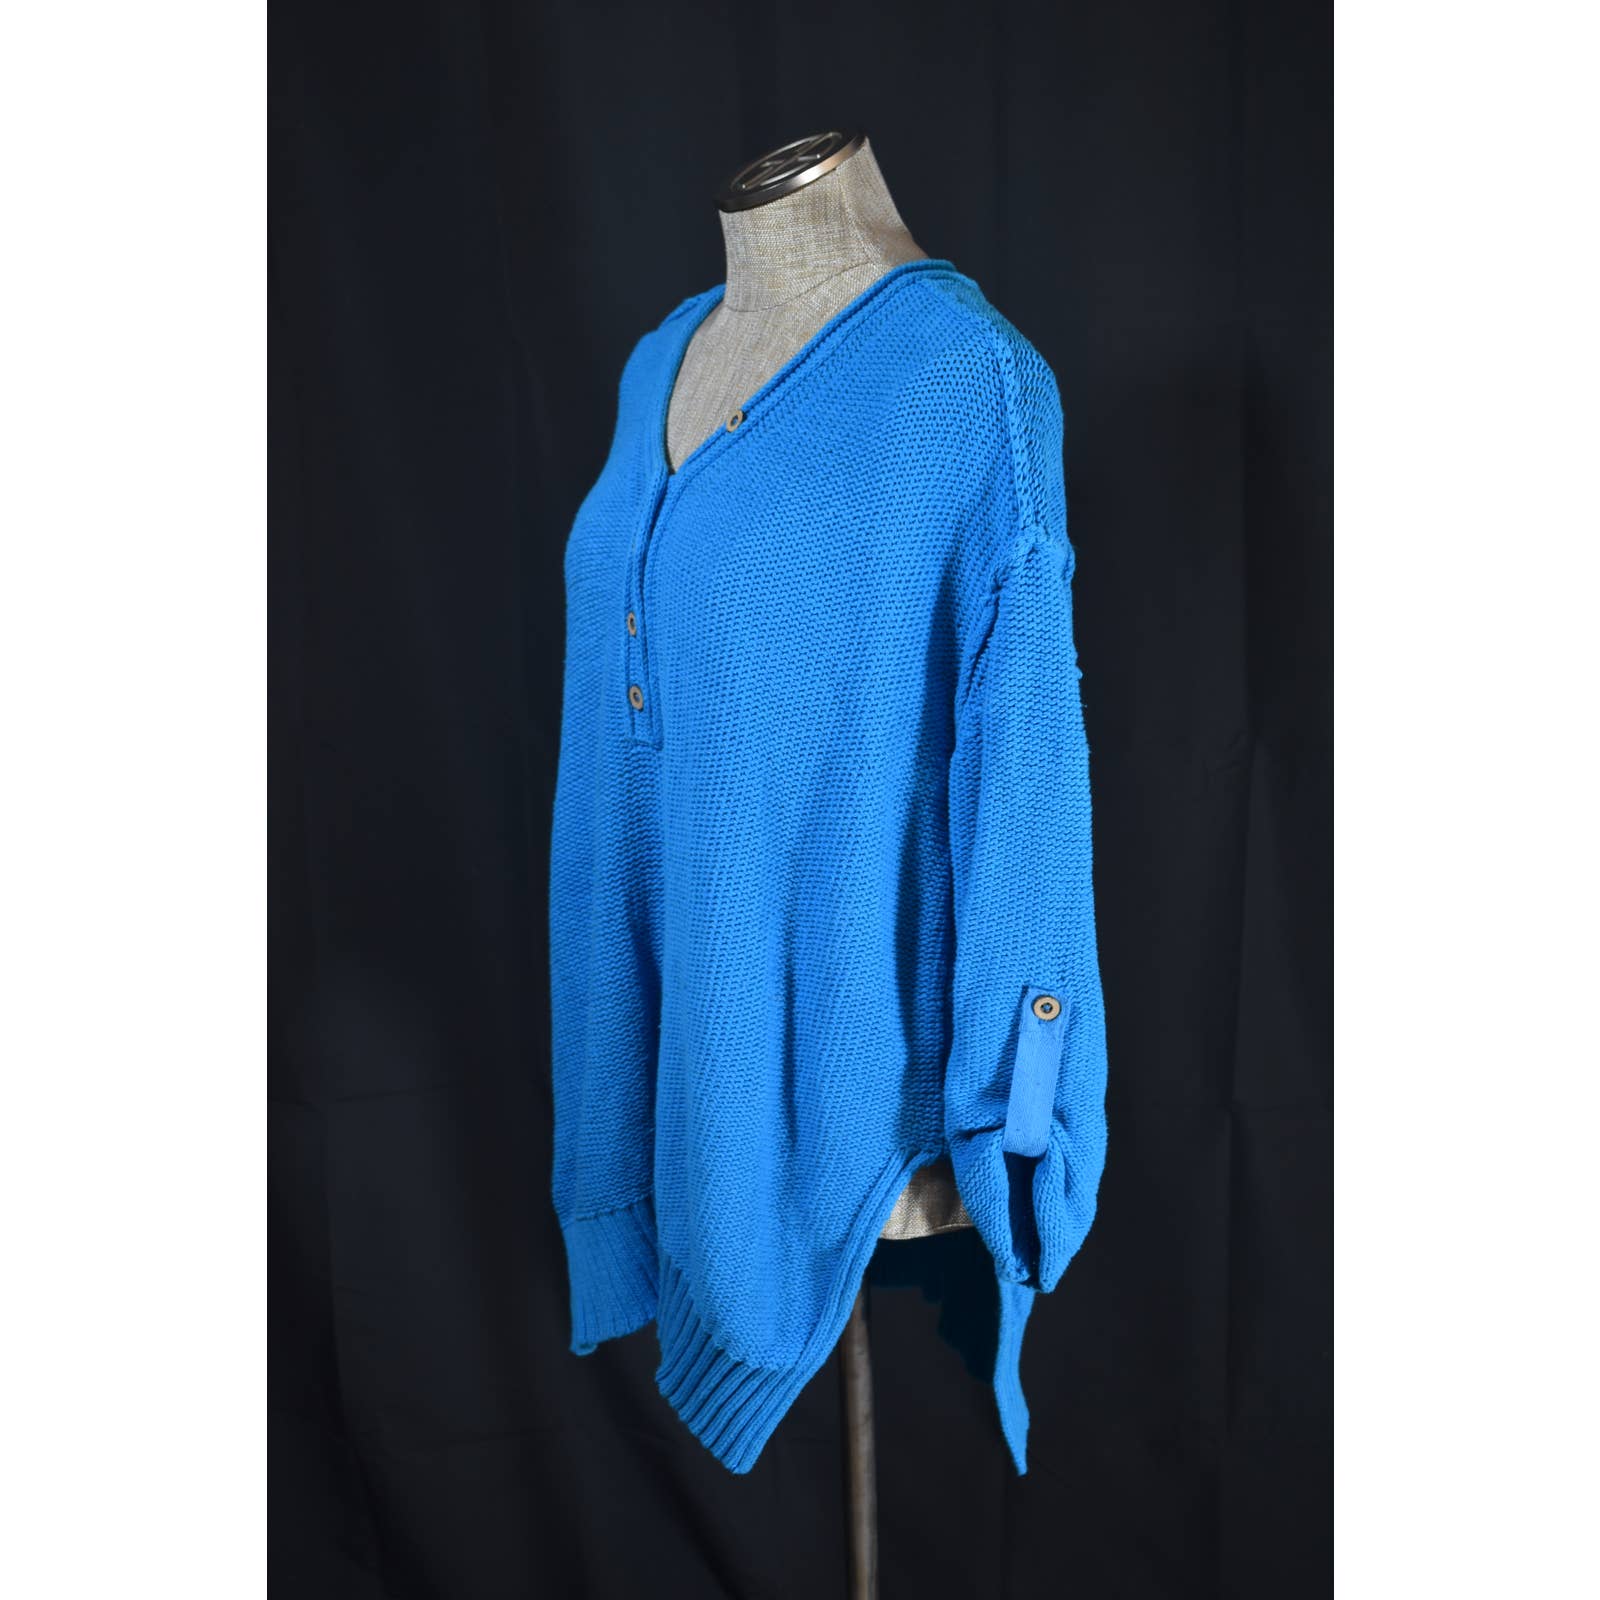 Free People We The Free Blue Chunky Henley Knit Tunic Sweater - S